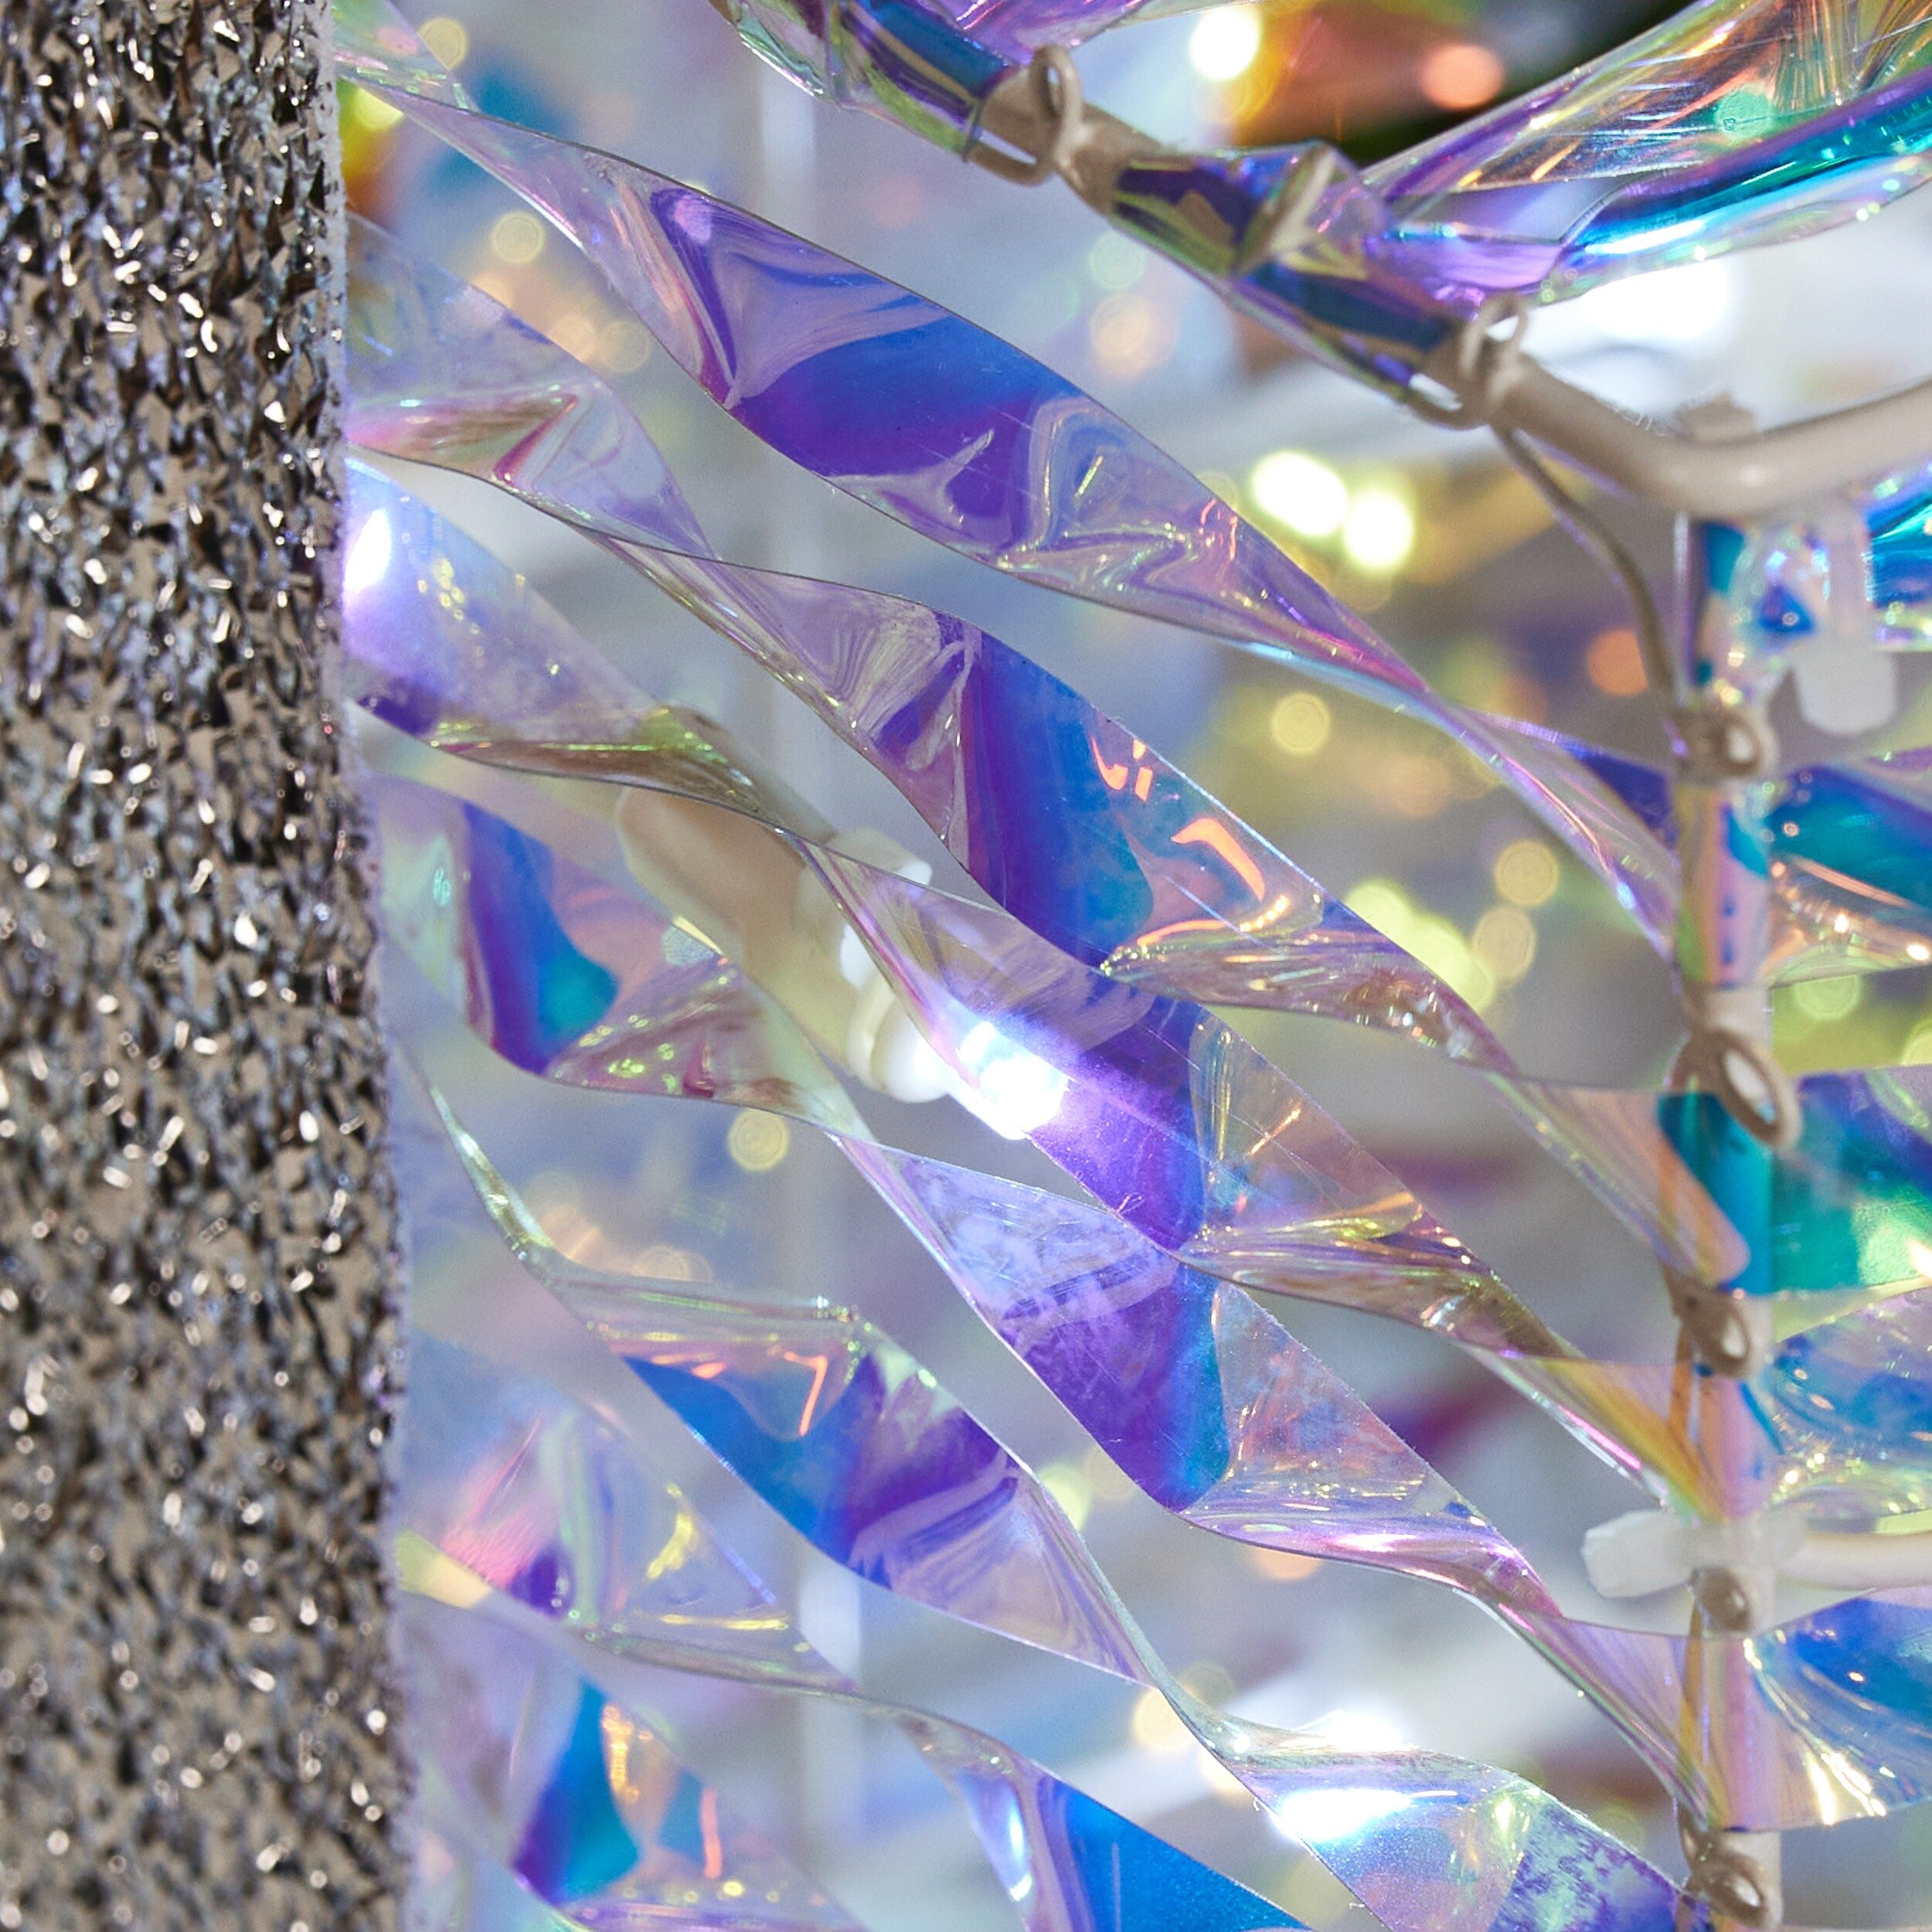 Close up of the silver and iridescent elements of the chandelier - Diamond